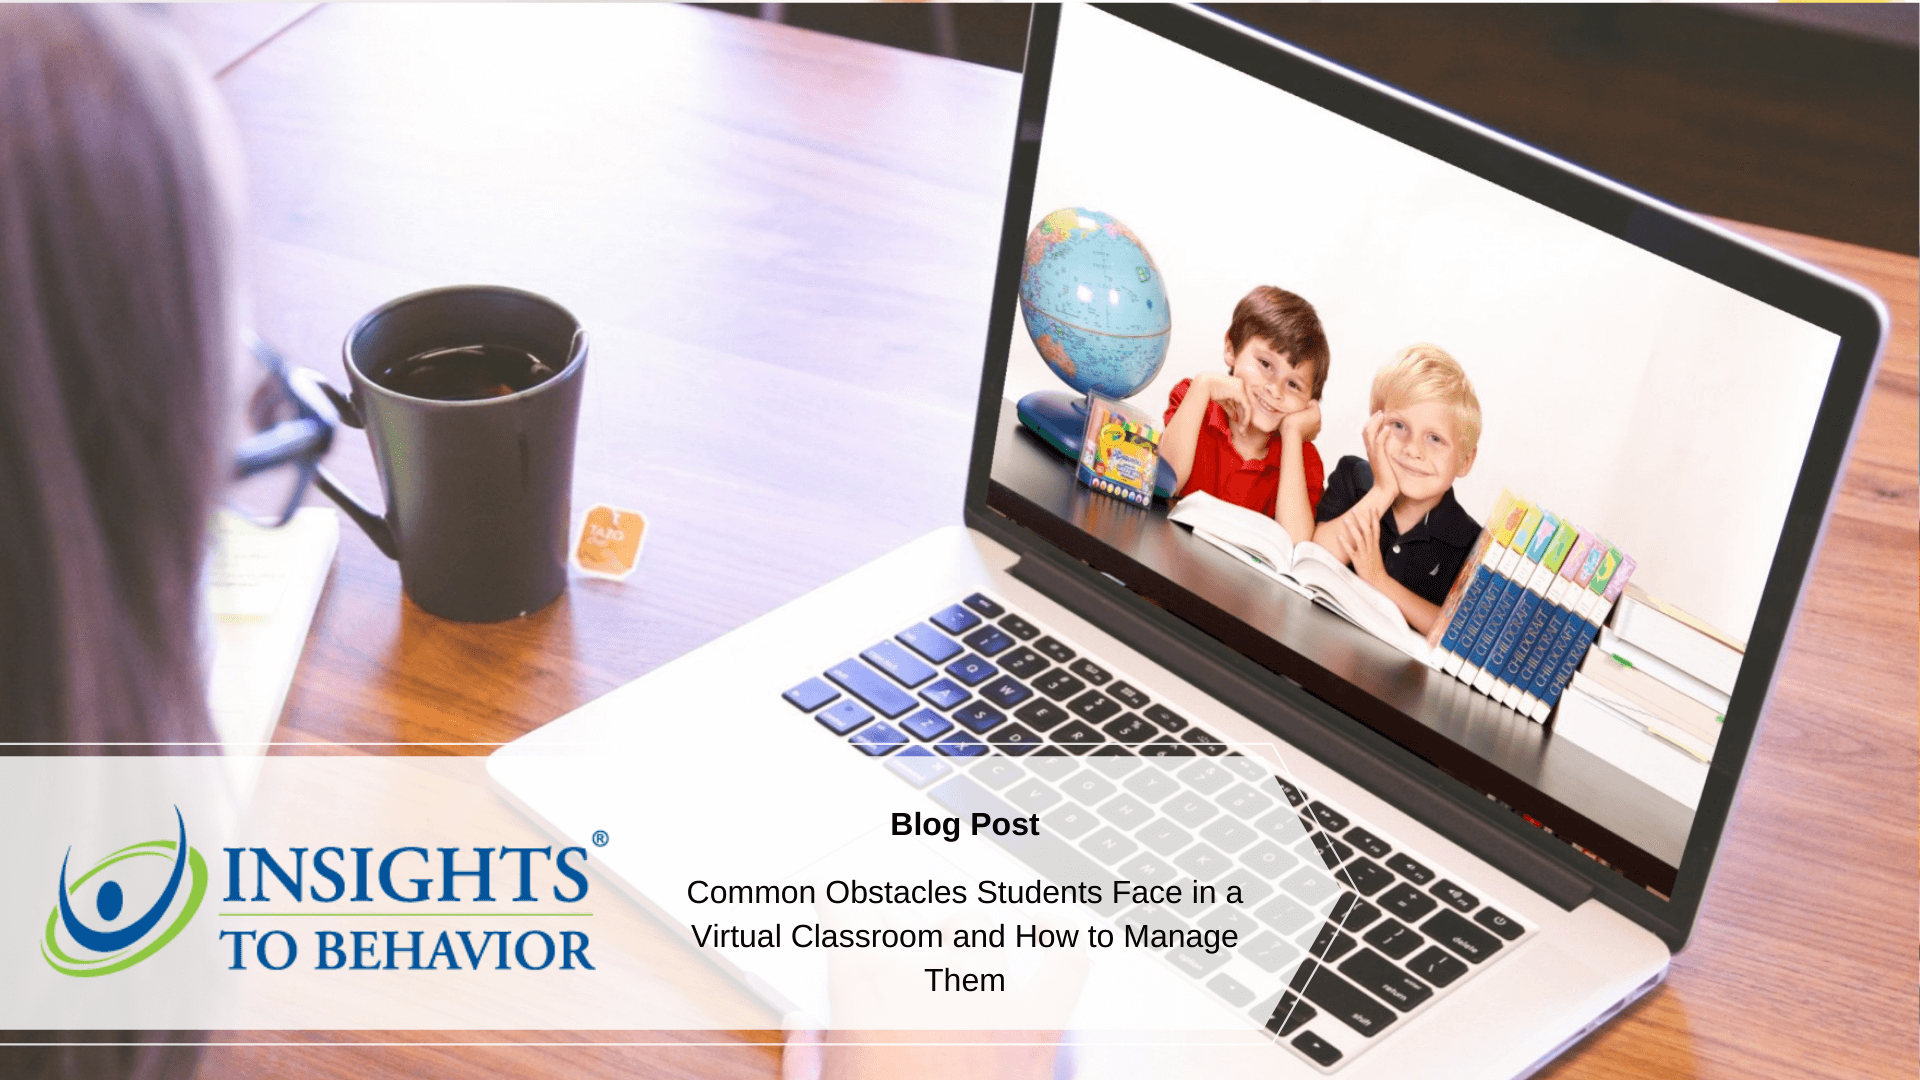 Insights to behavior blog post image template (14)